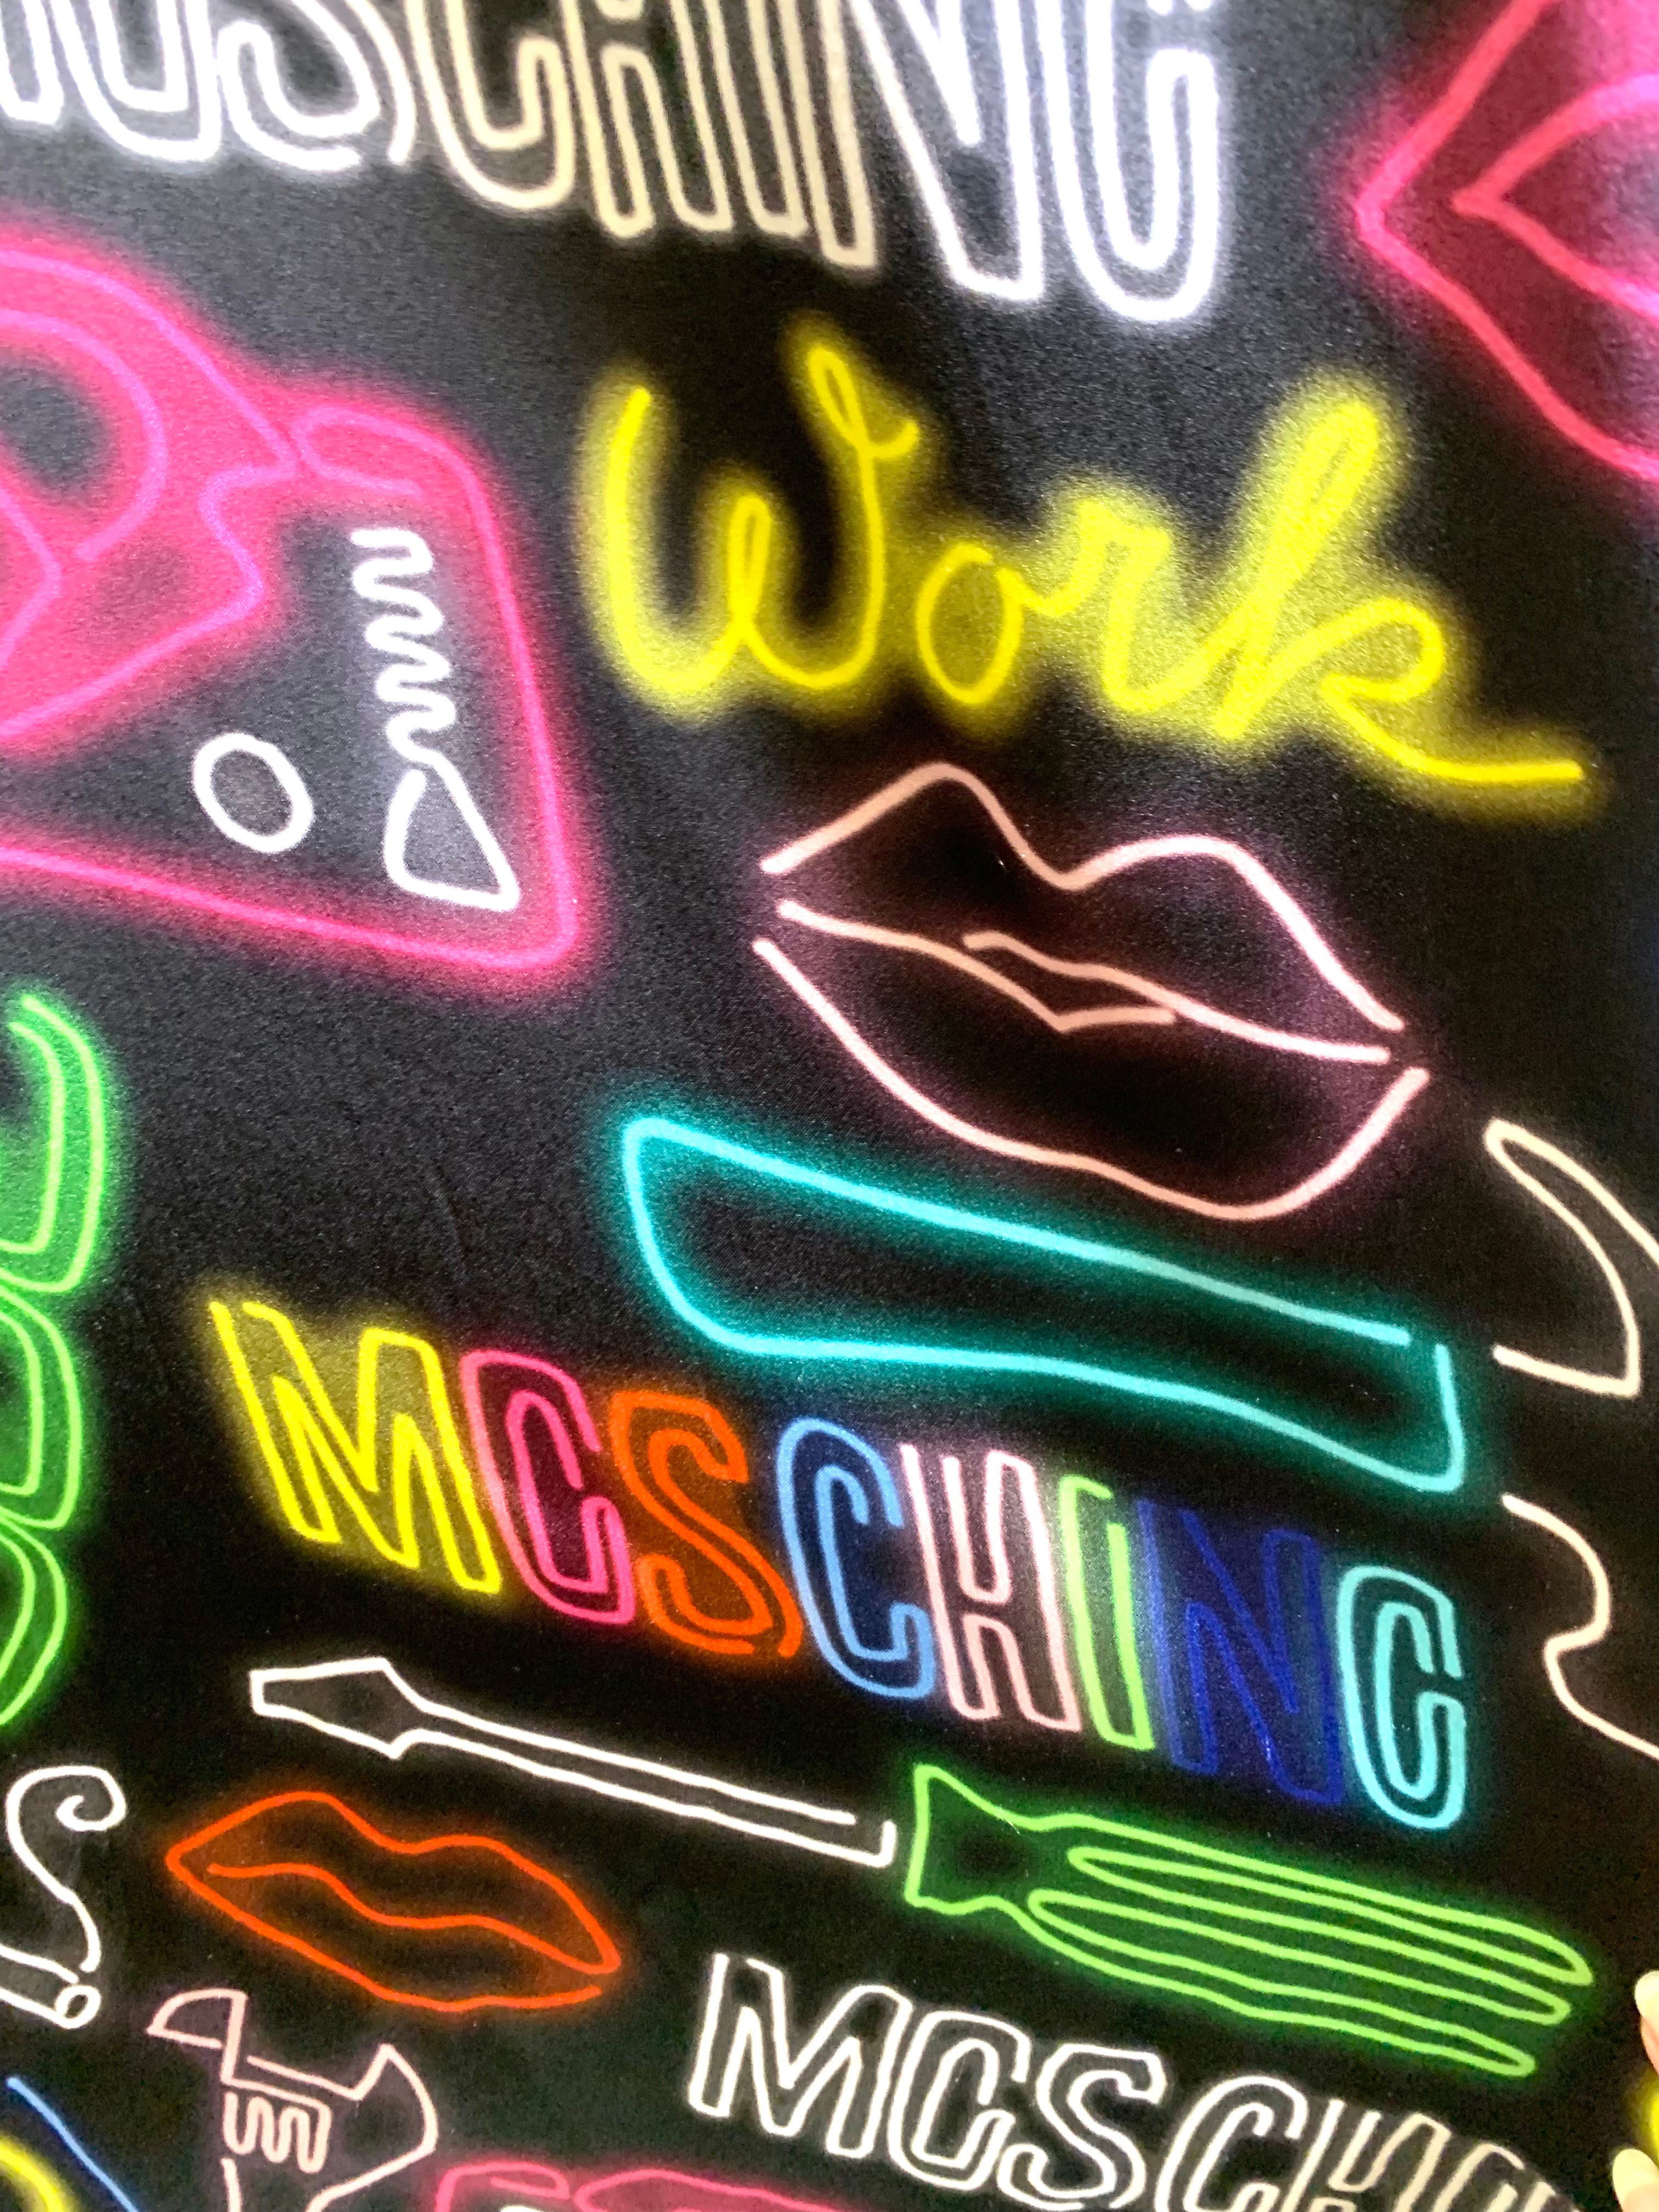 Moschino Couture SS 2016 Neon Sign Novelty Print Silk Gown PRINT DETAIL